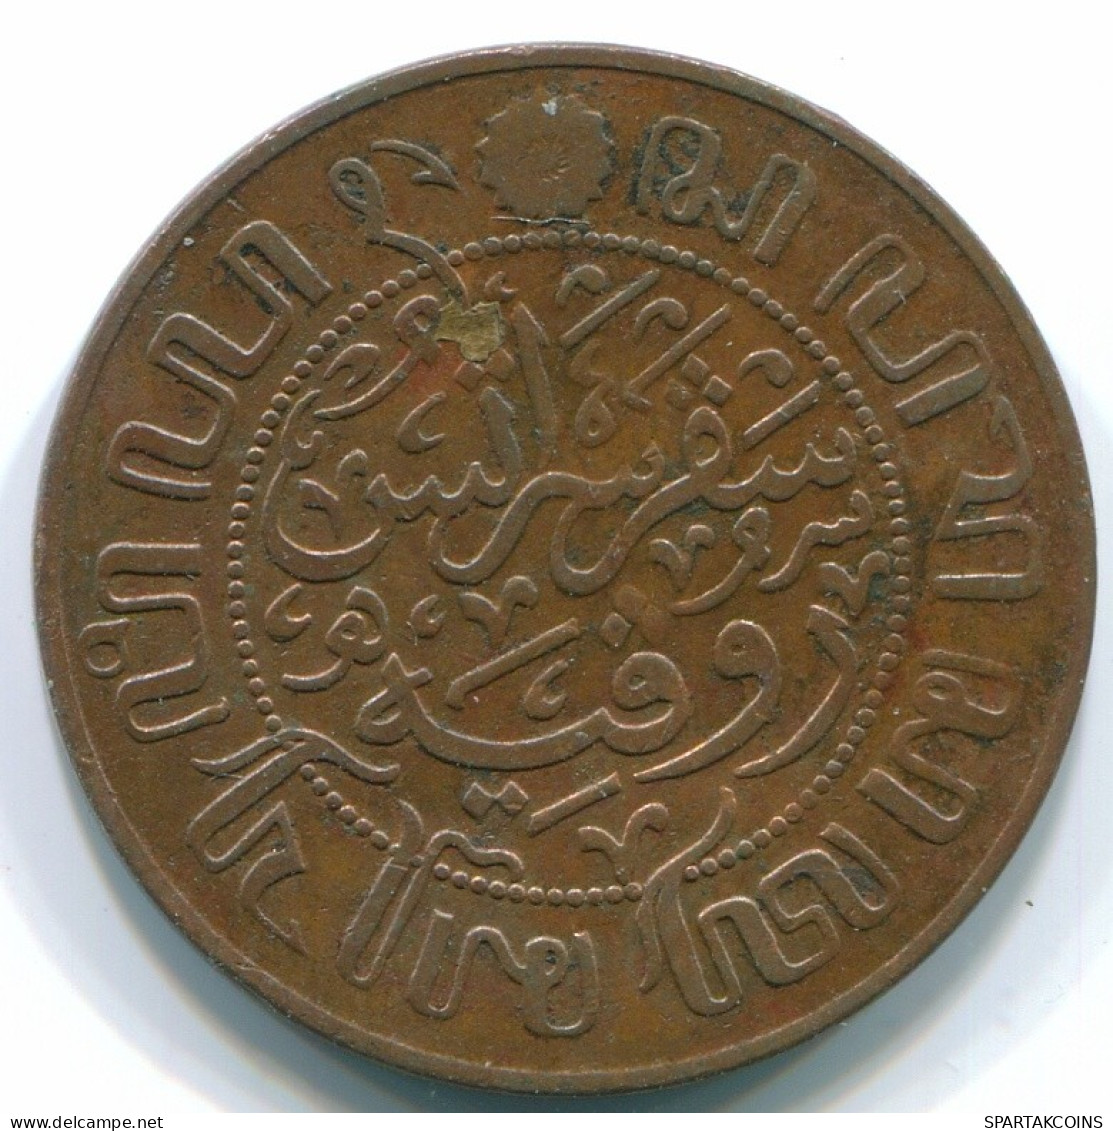 1 CENT 1929 NETHERLANDS EAST INDIES INDONESIA Copper Colonial Coin #S10110.U.A - Nederlands-Indië